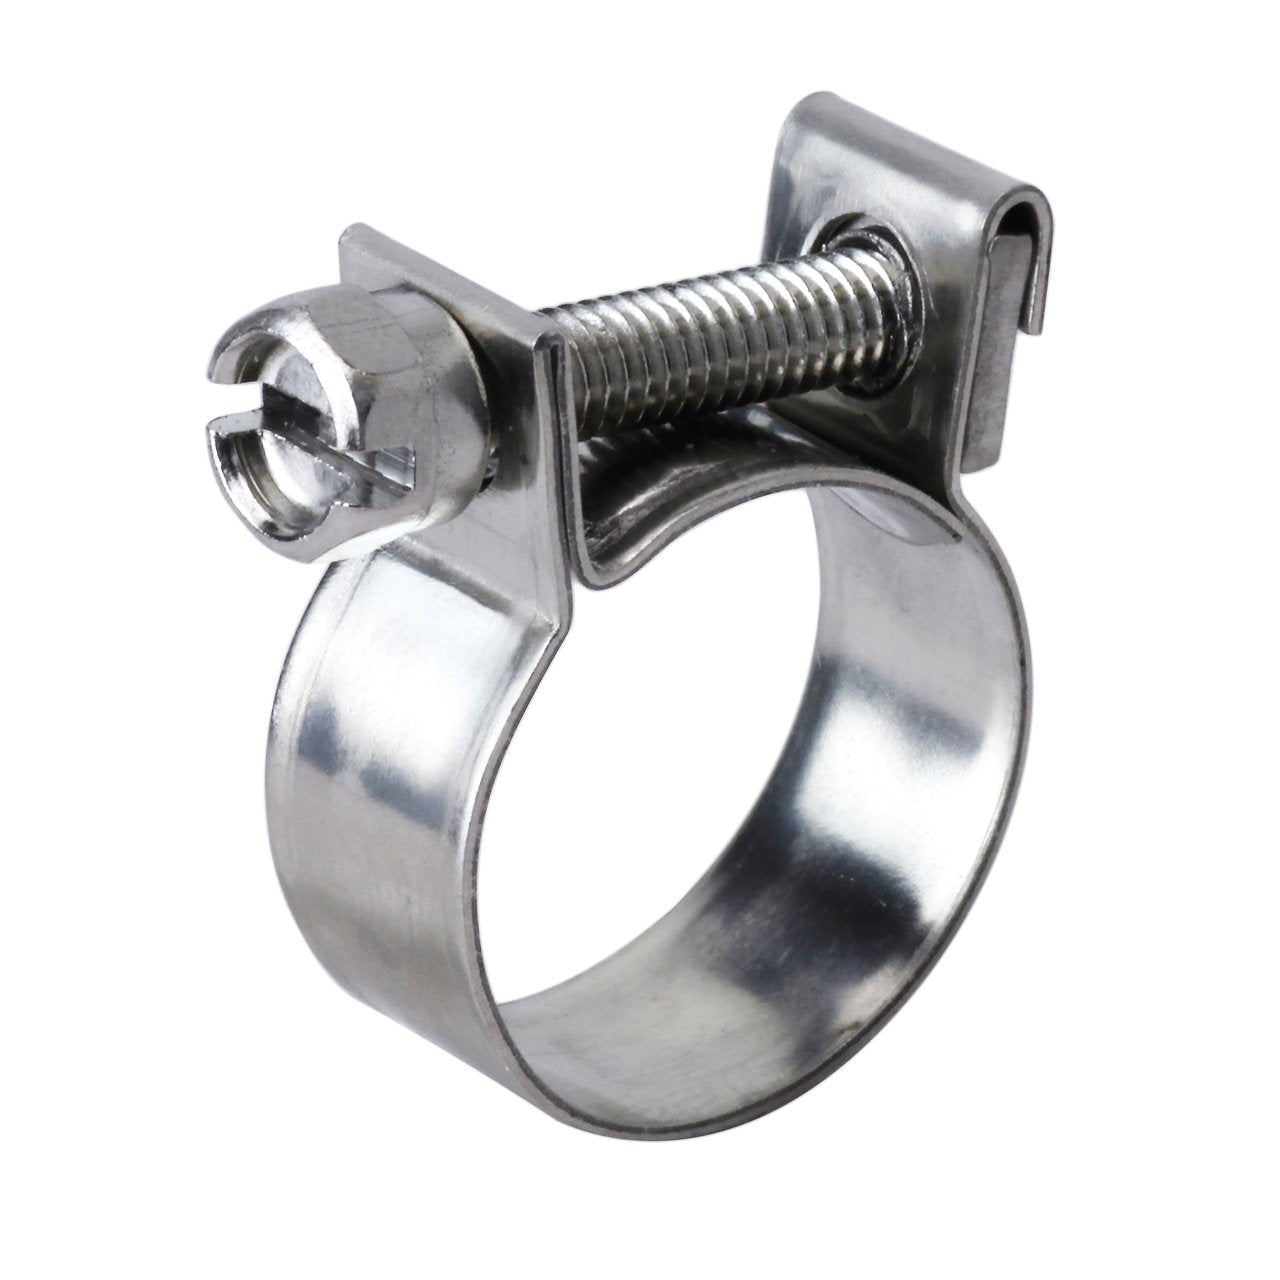 HPS Size # 16 Stainless Steel 3/8 Fuel Injection Hose Clamp, Range: 35/64  - 5/8 (14mm - 16mm)